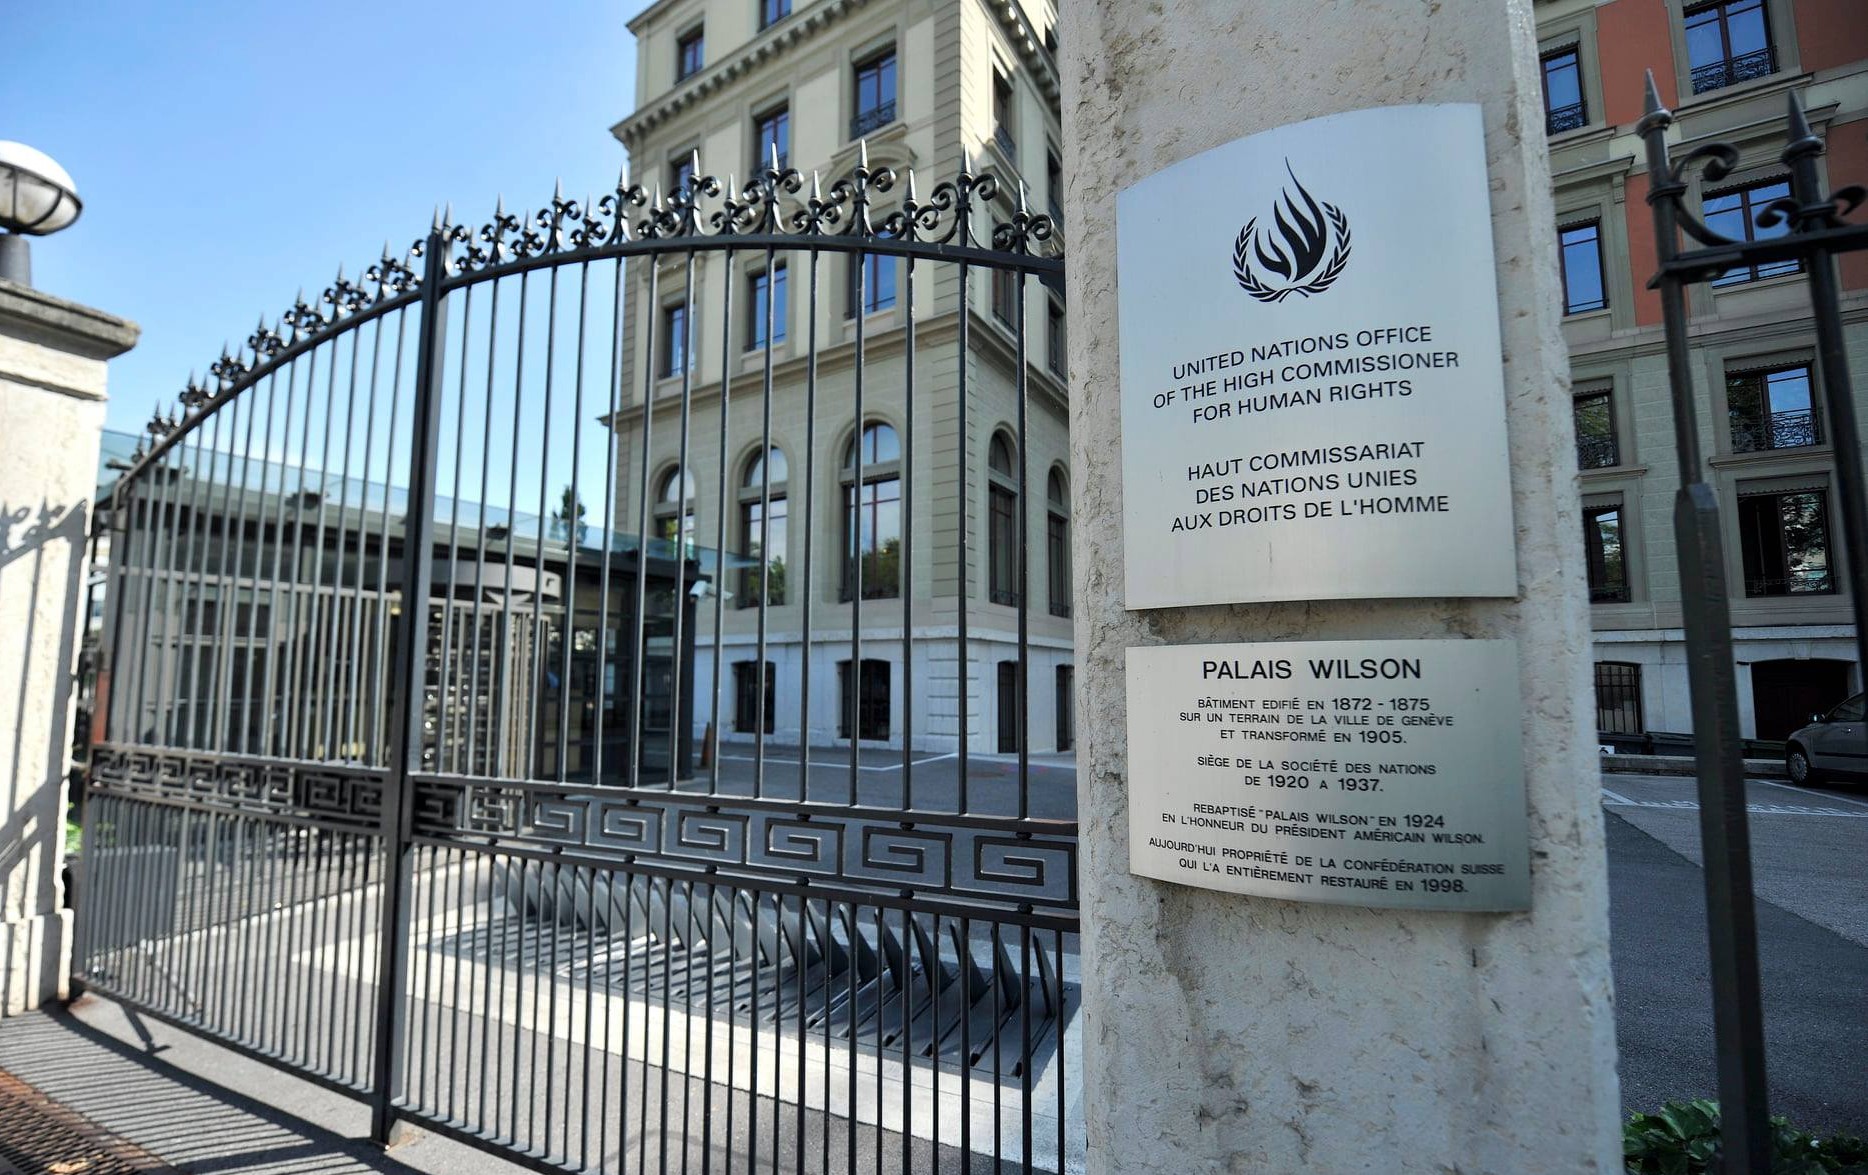 UN Office of the High Commissioner for Human Rights headquarters in Geneva